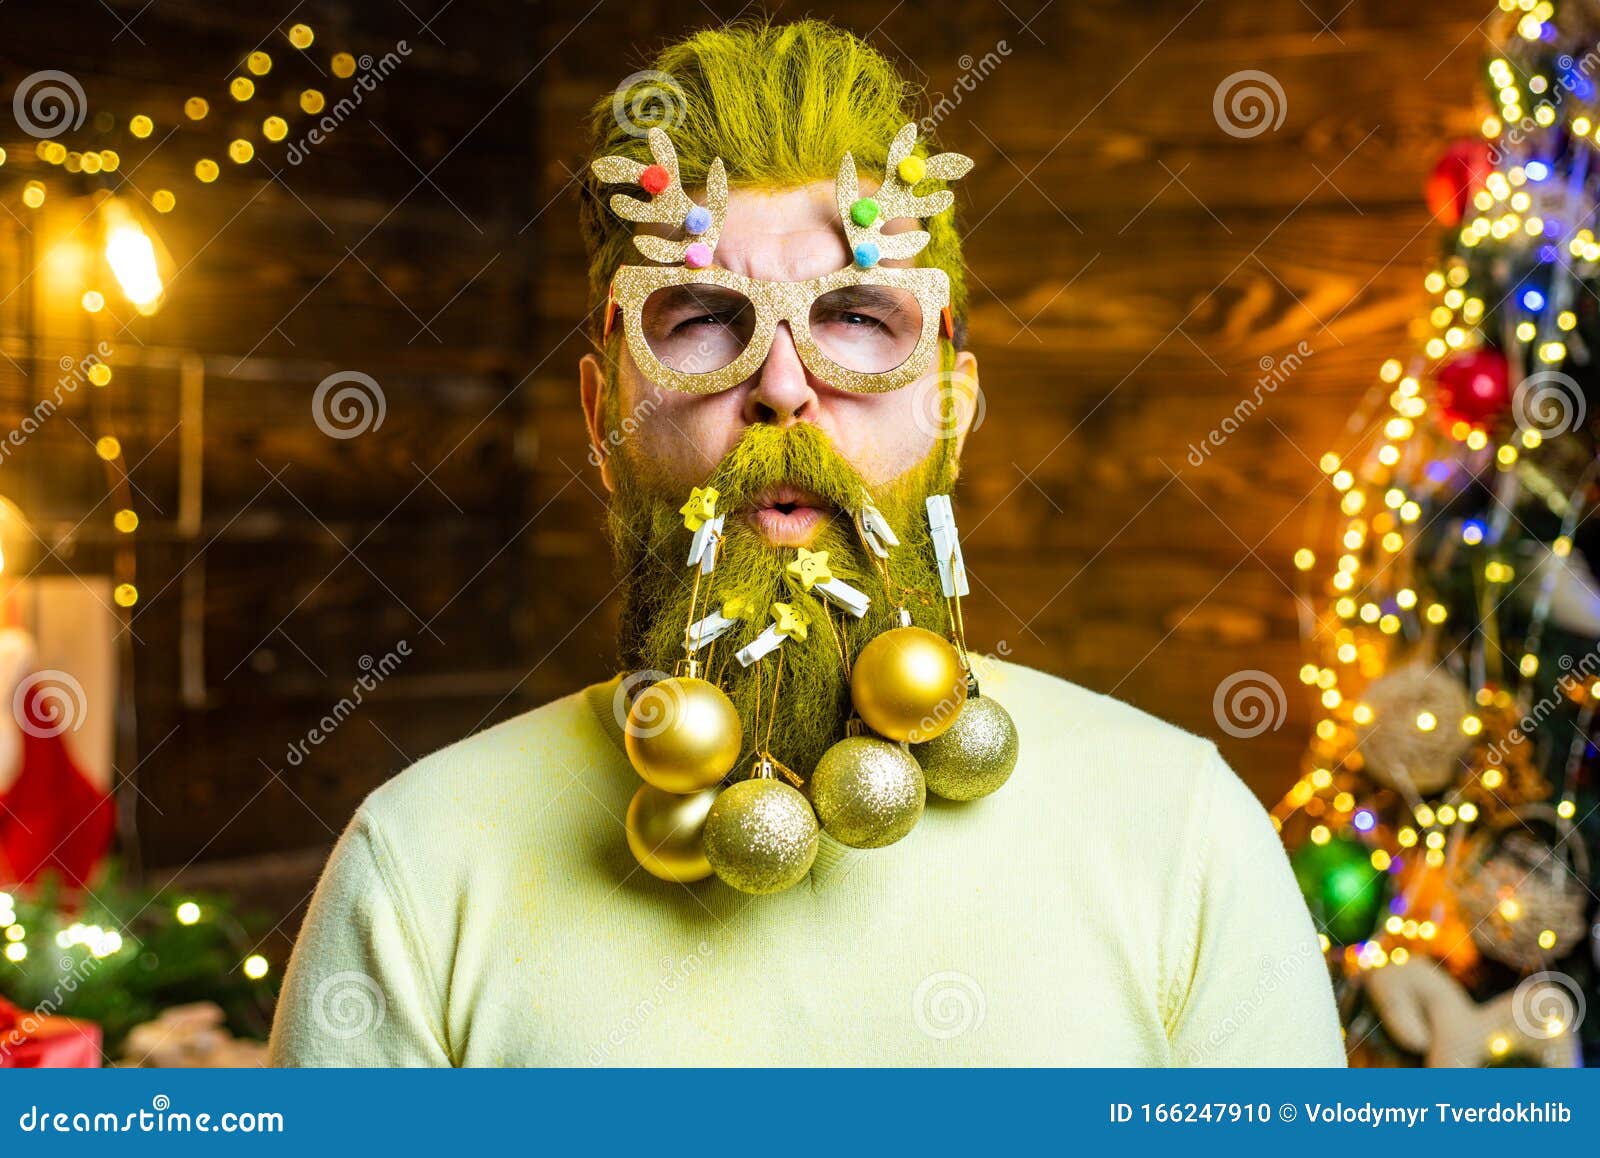 Christmas Or New Year Barber Shop Concept Beard With Bauble Santa In Barbershop Hipster Funny